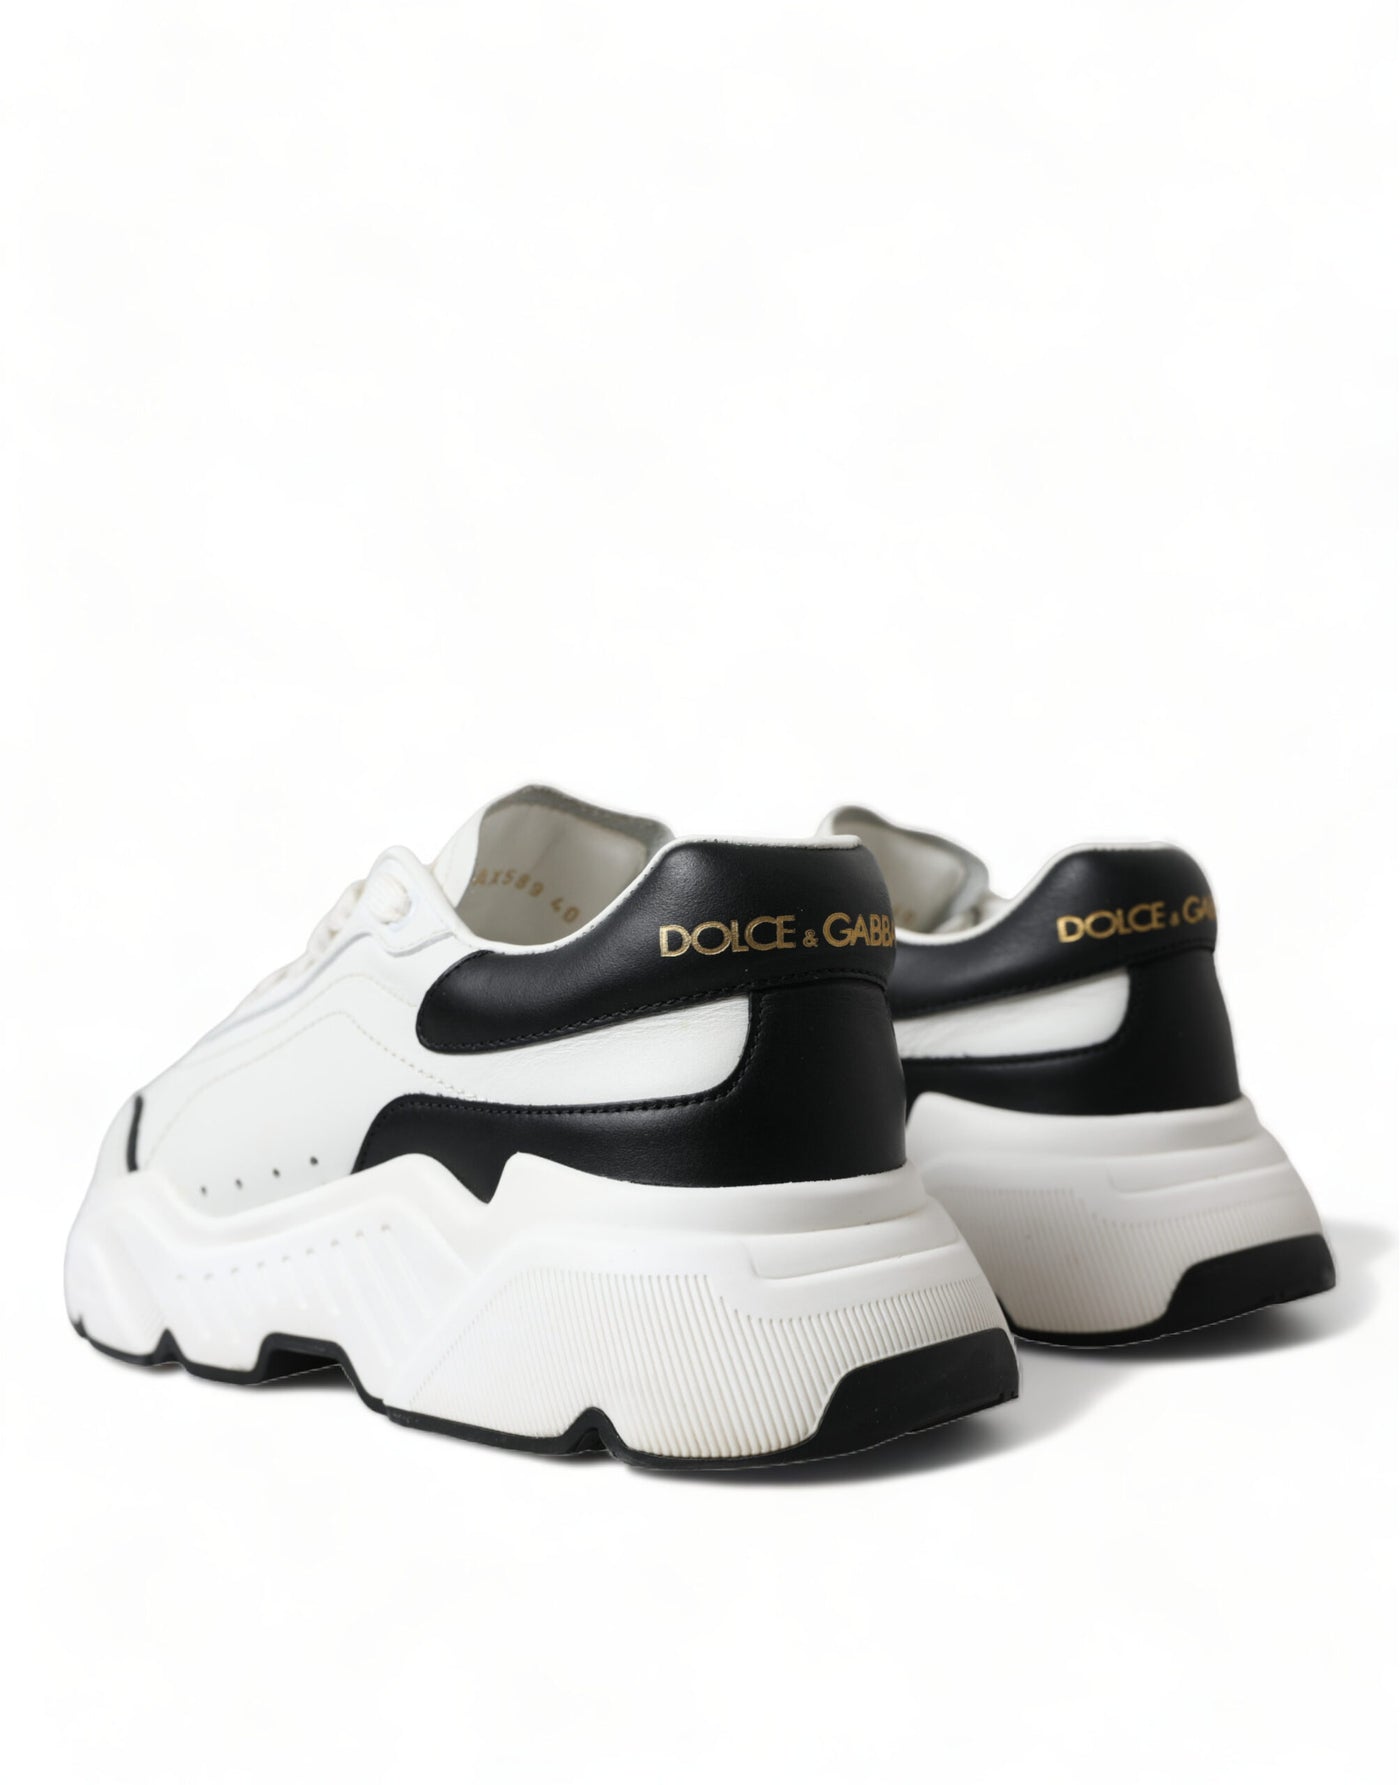 Dolce & Gabbana White Black Low Top Daymaster Sneakers Shoes